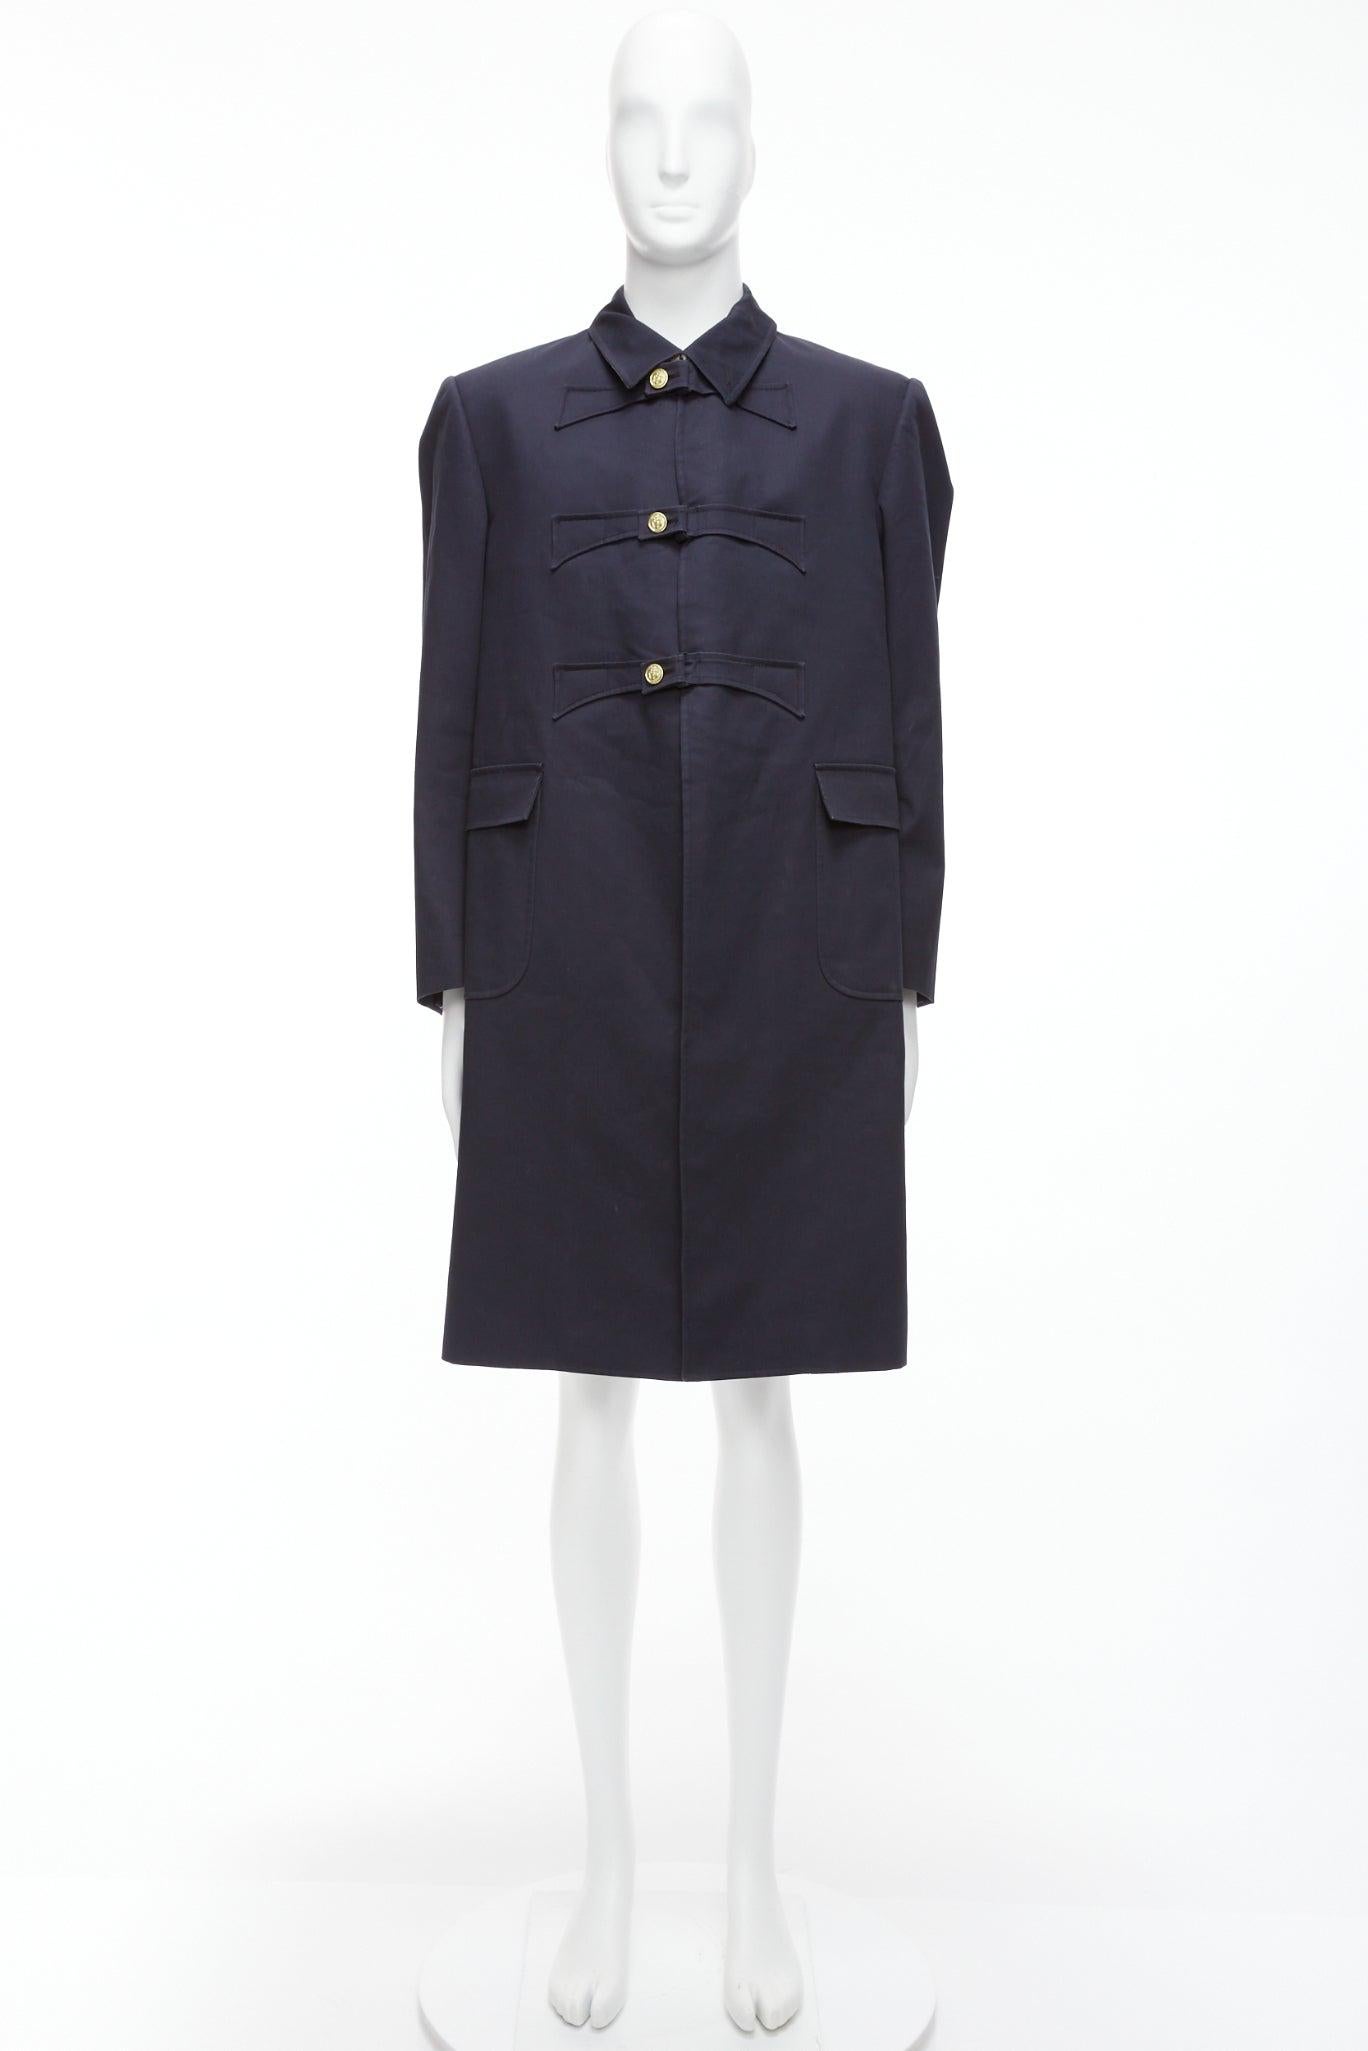 THOM BROWNE 2008 navy gold anchor button loop through boxy longline coat Sz.3 L For Sale 6